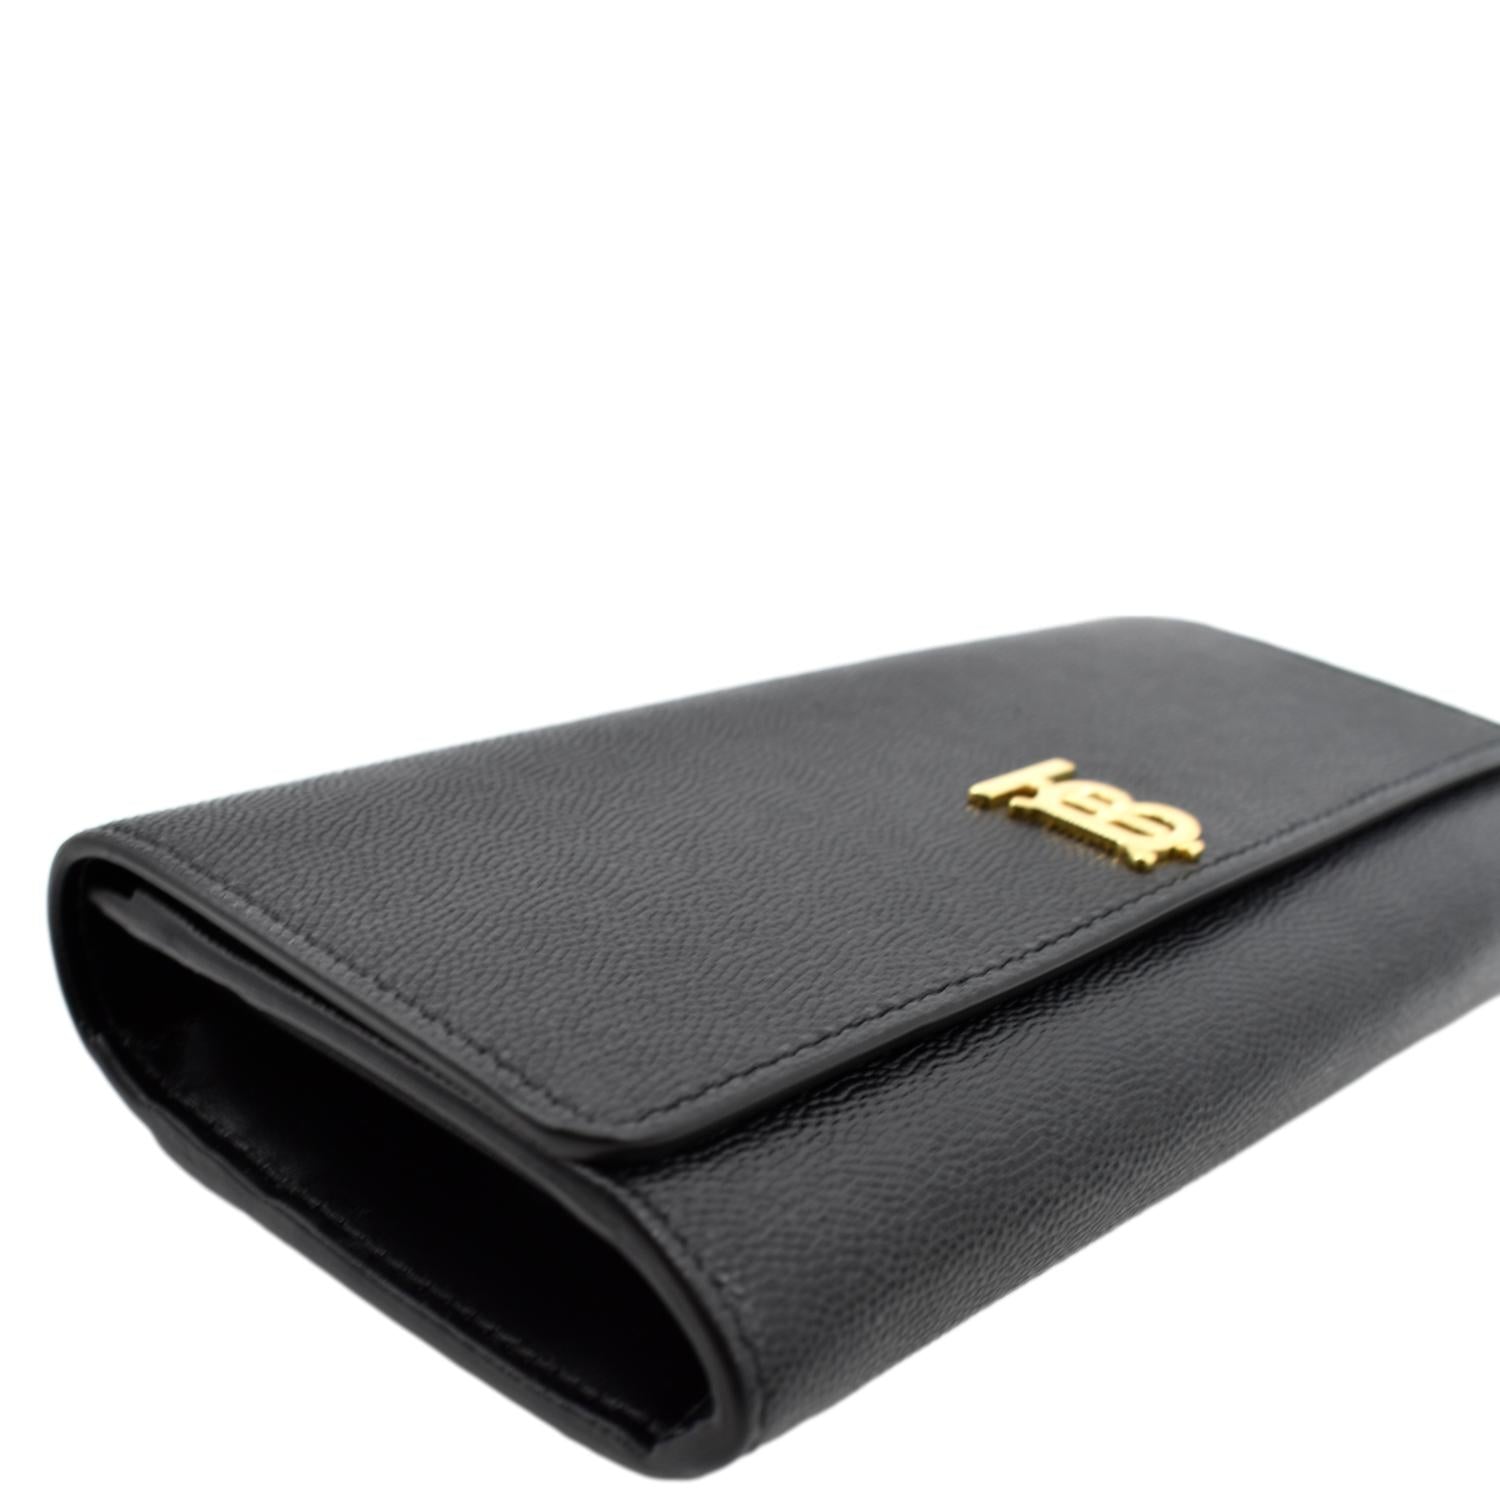 Burberry Women's TB Leather Wallet - Black One-Size